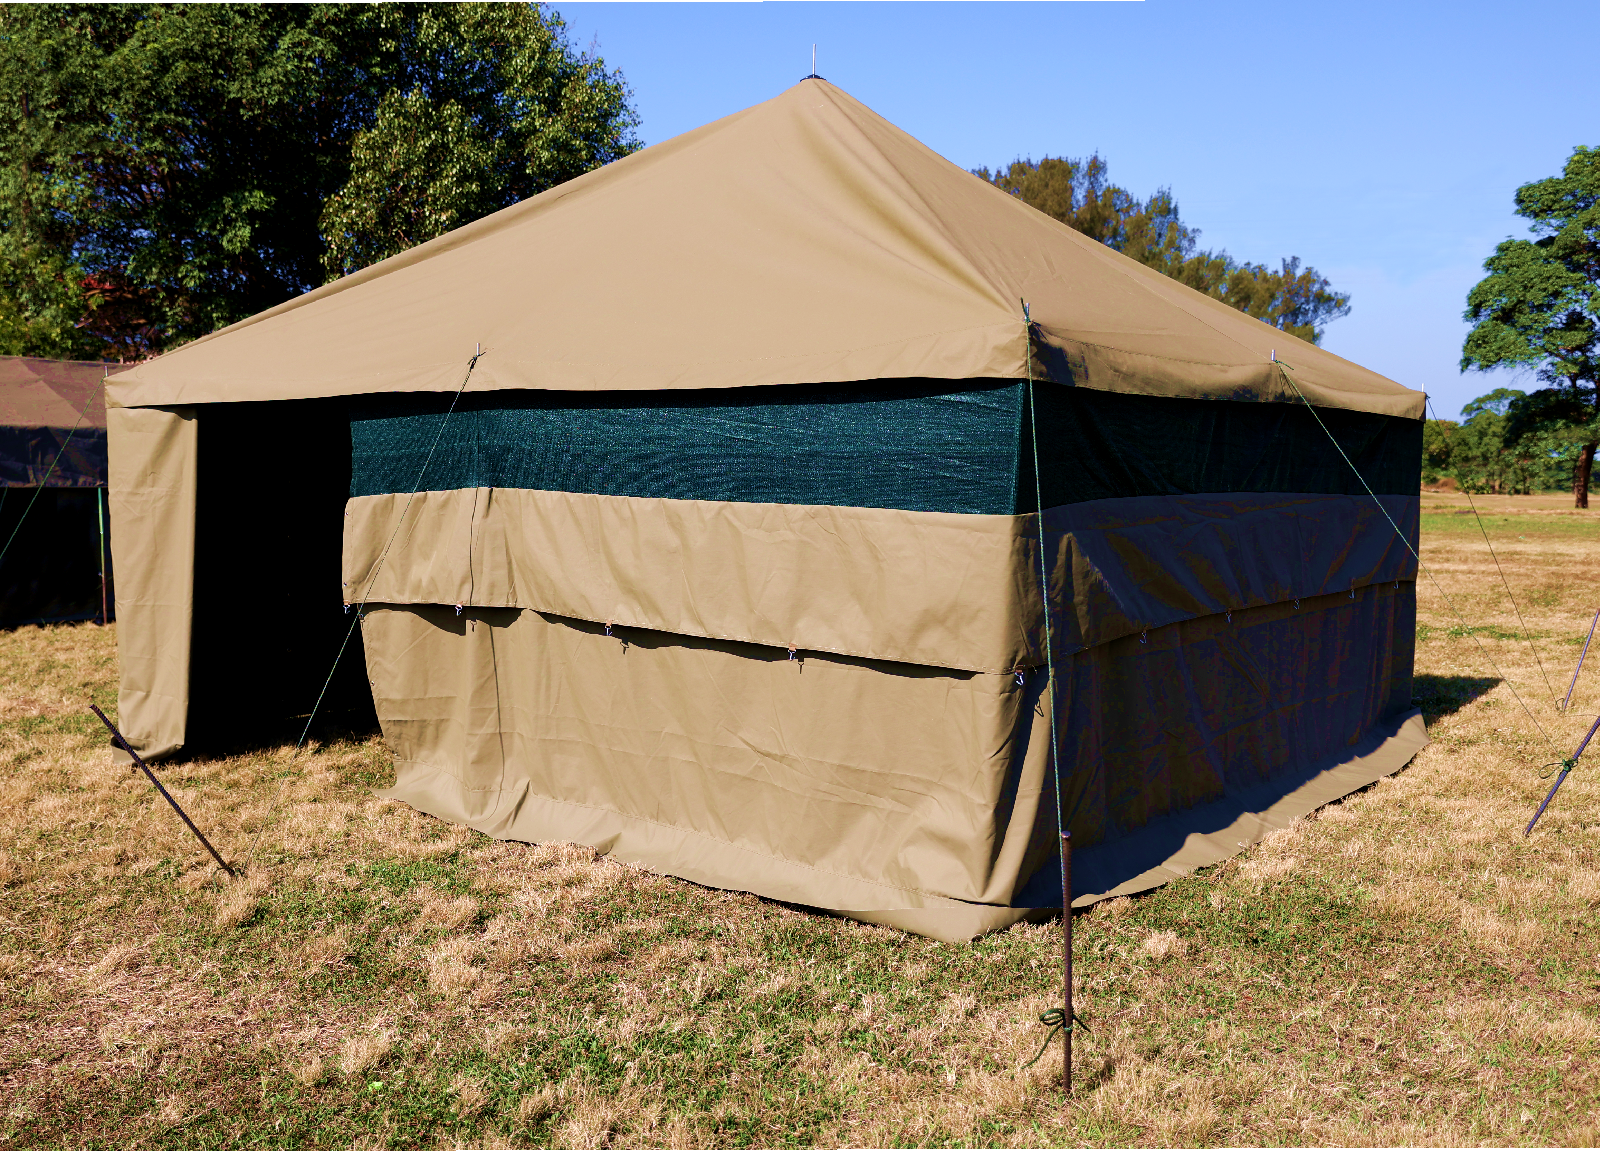 MILITARY TENTS-ARMY TENTS-CANVAS CAMPING TENTS-RELIEF TENTS-REFUGEE TENTS-EMERGENCY TENTS-HOSPITAL TENTS